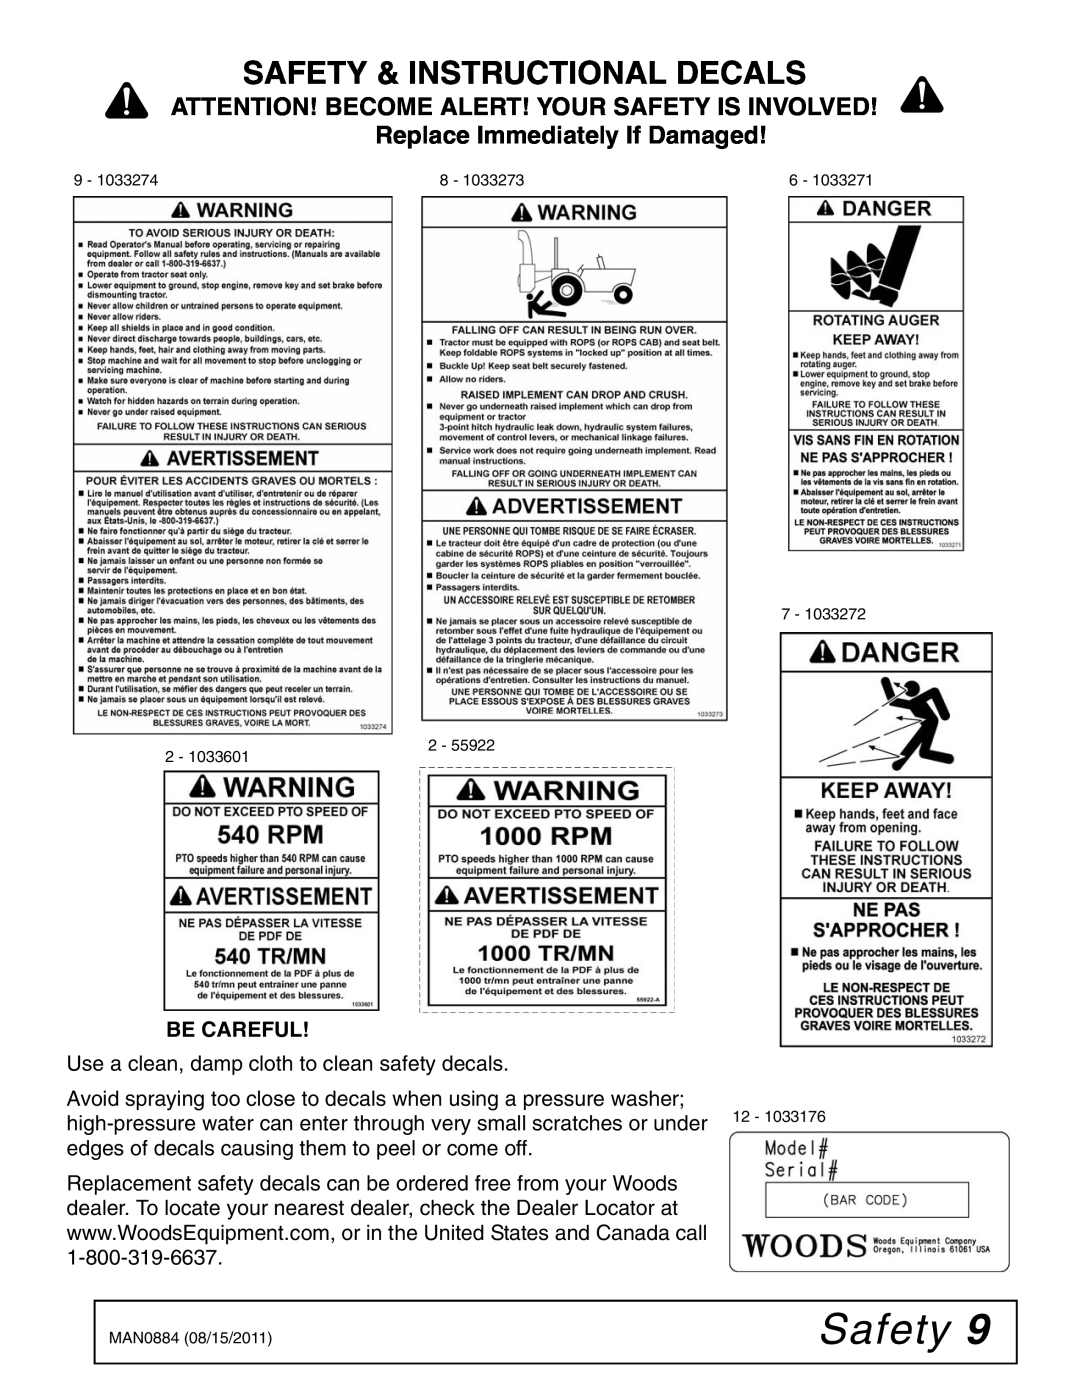 Woods Equipment SS84-2 manual Be Careful, Use a clean, damp cloth to clean safety decals, Safety & Instructional Decals 